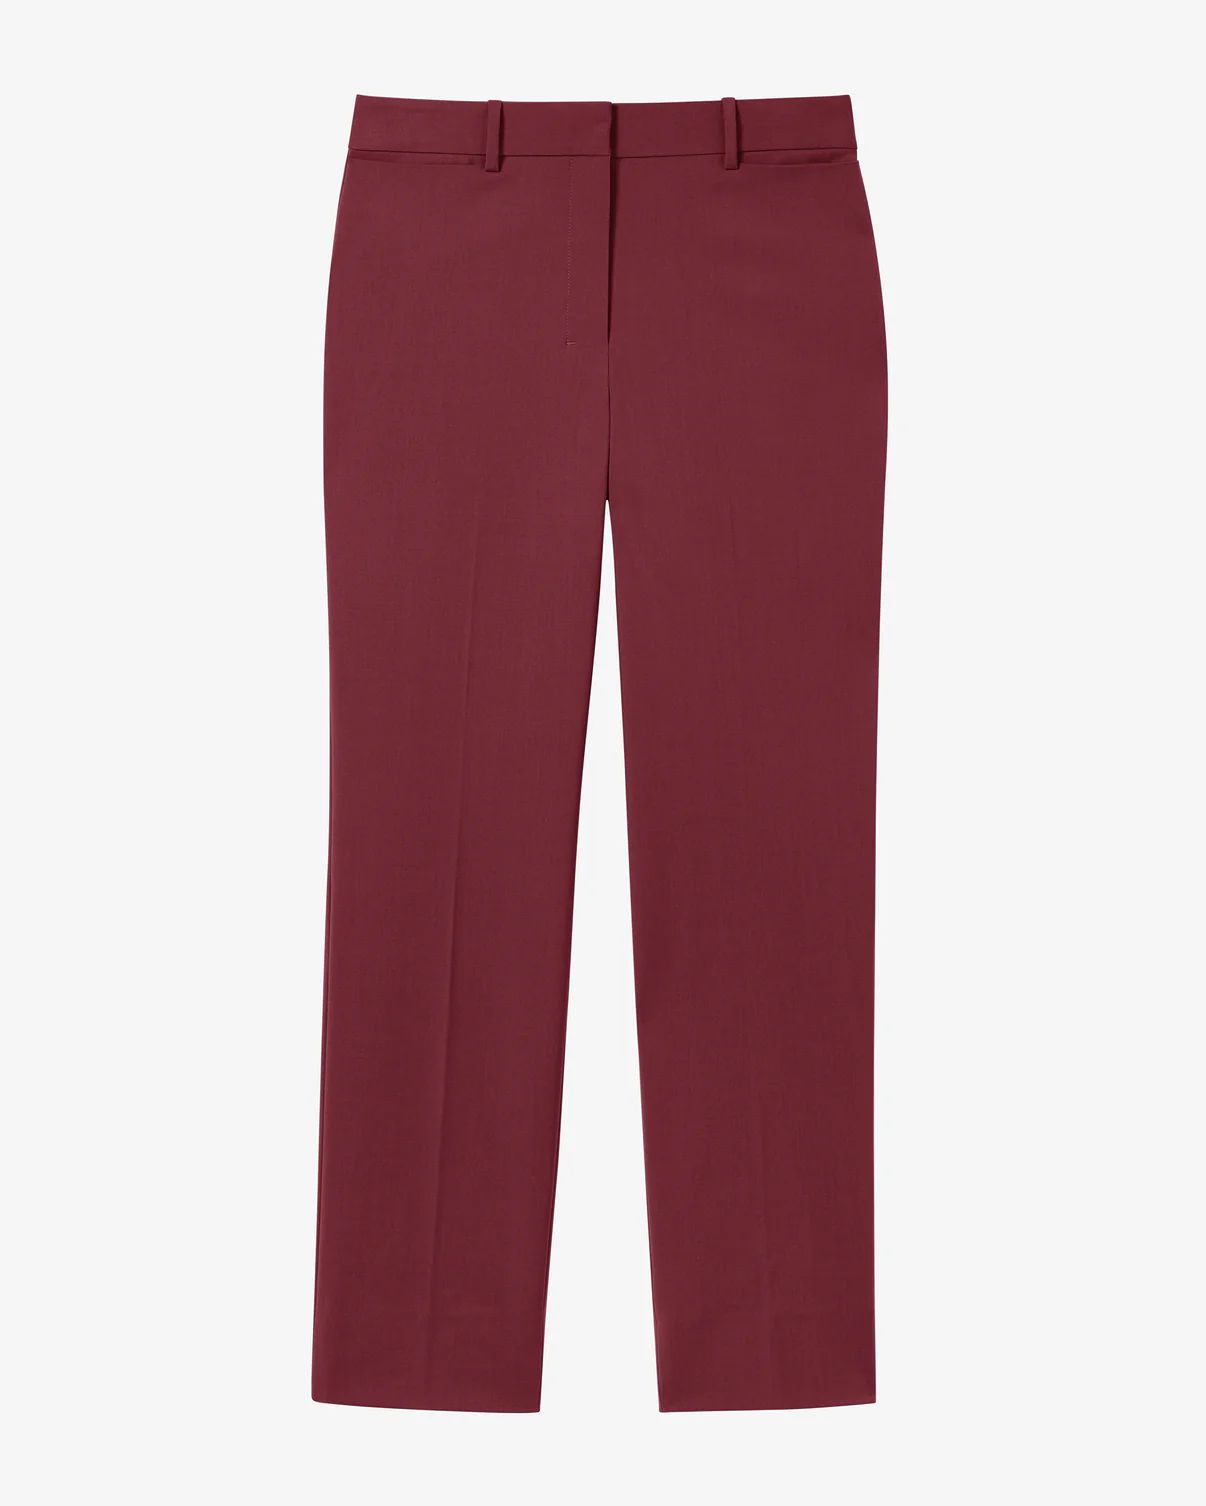 The Smith Pant - Washable Wool Twill | MM LaFleur